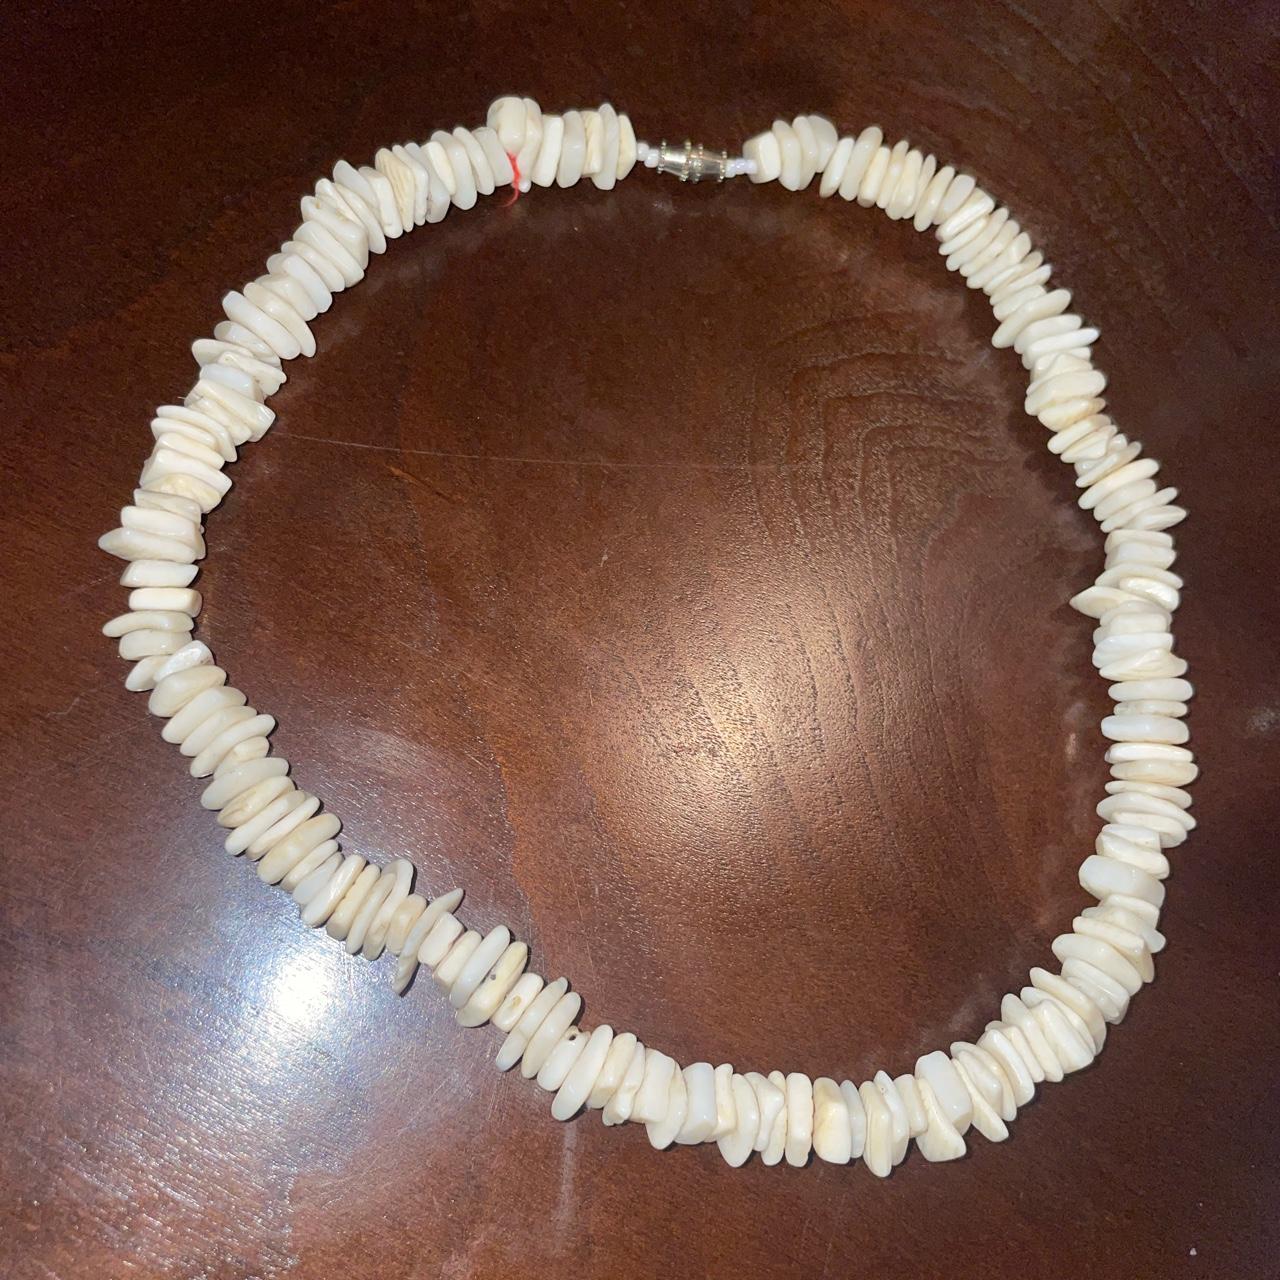 Authentic Hawaiian Puka shell necklace with Hawaiian flower medallion for  sale in Boonville, MO - 5miles: Buy and Sell